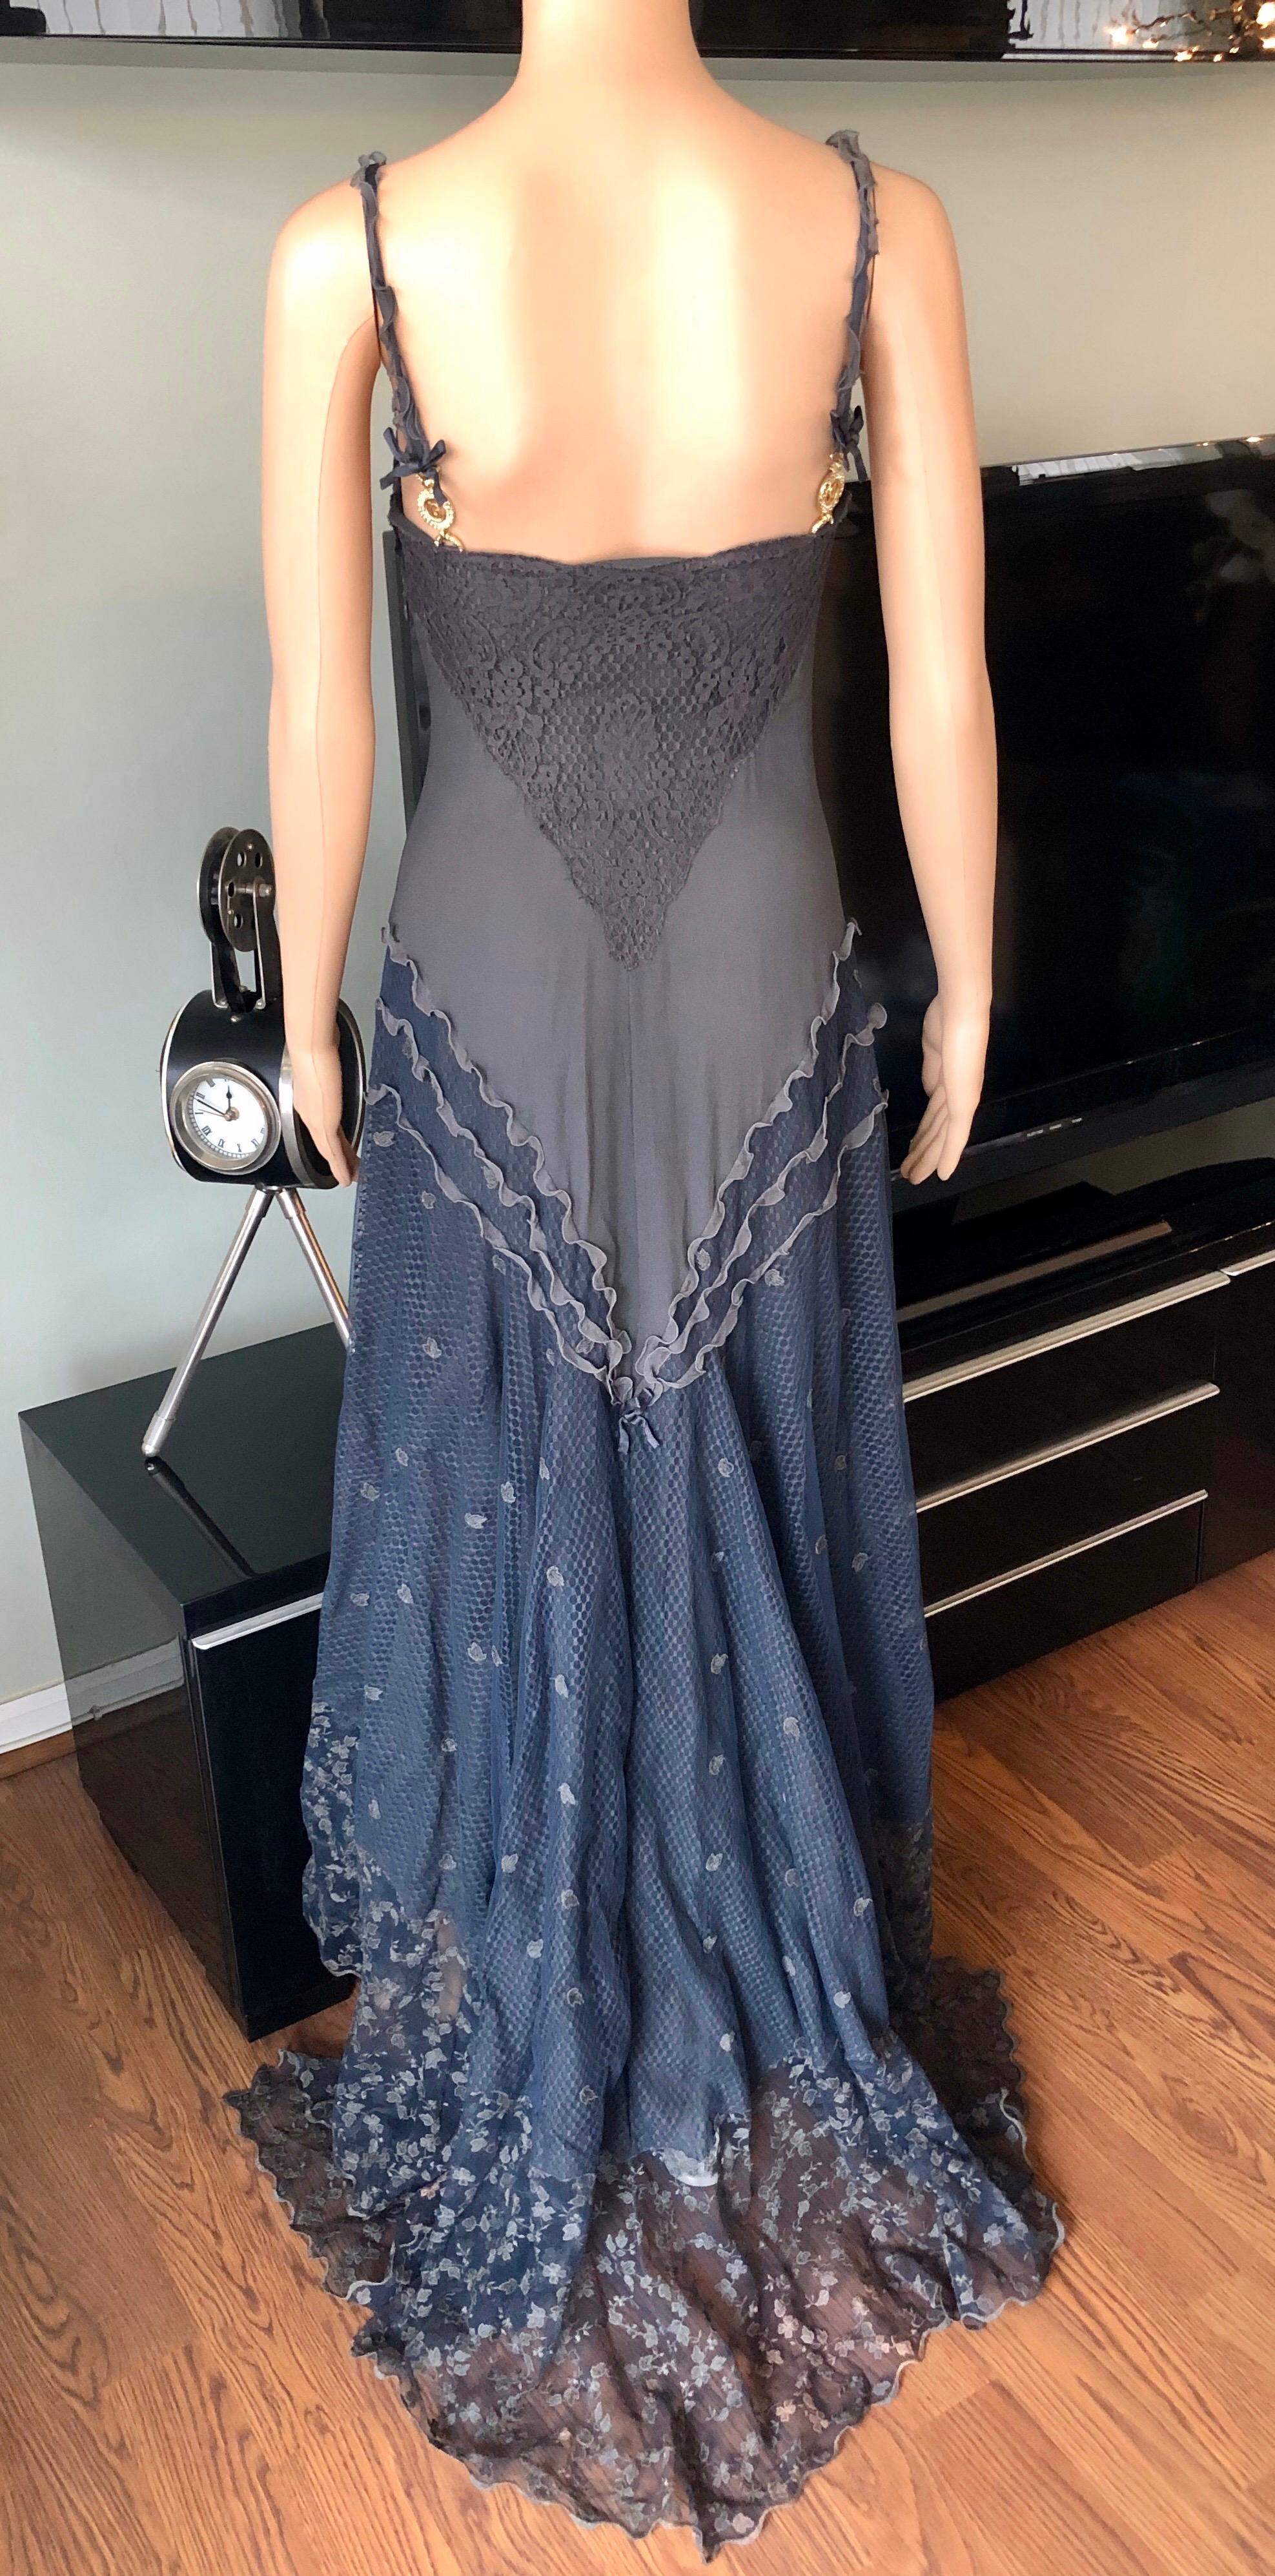 Gianni Versace S/S 1997 Runway Sheer Lace Panels Grey Evening Dress Gown For Sale 2